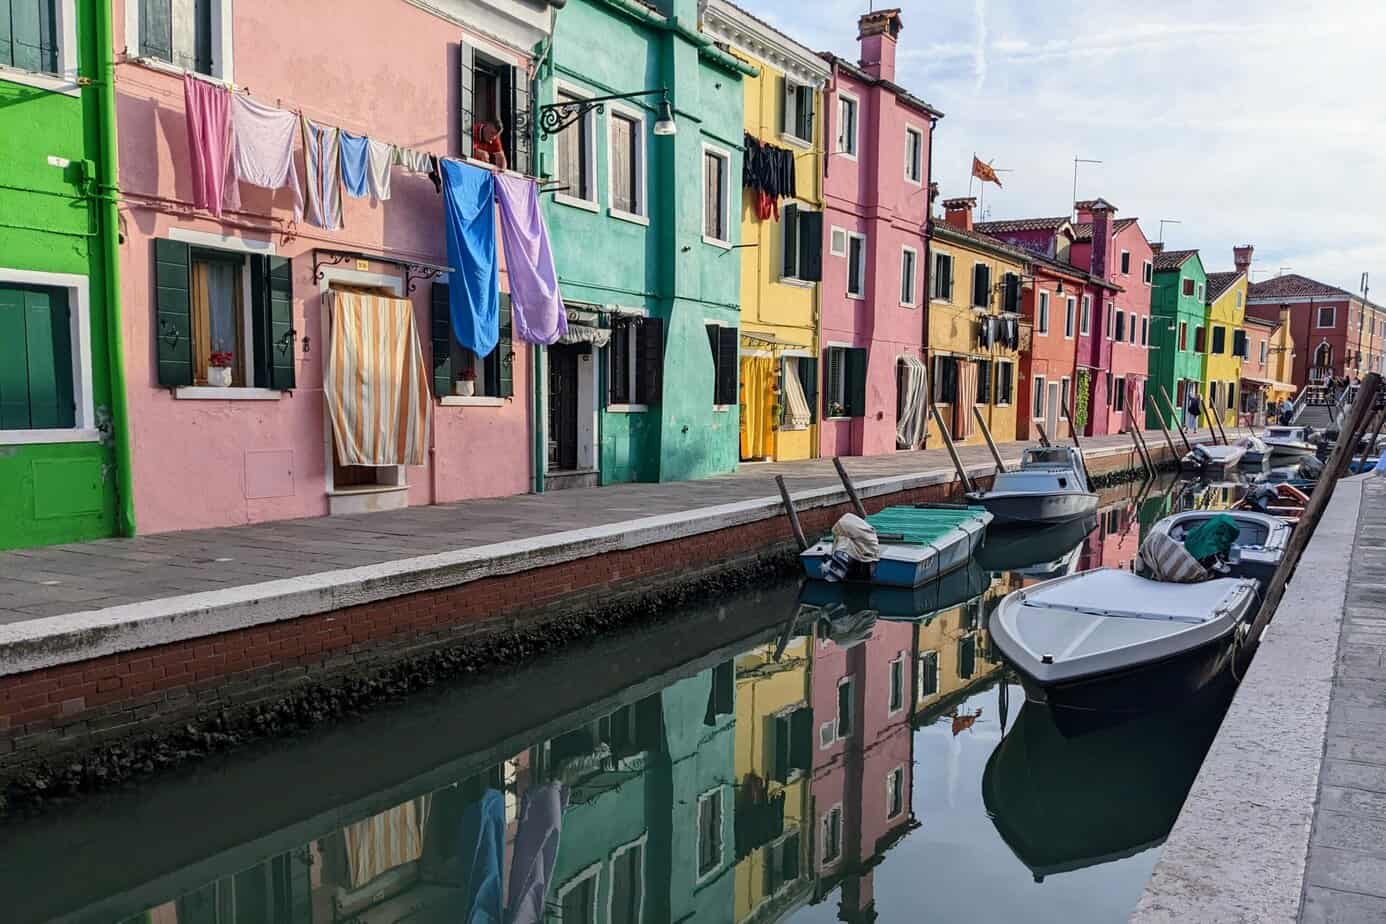 Colorful houses line water in Burano. Boats sit in the canal. Pink, Green, and yellow houses alternate on the water.